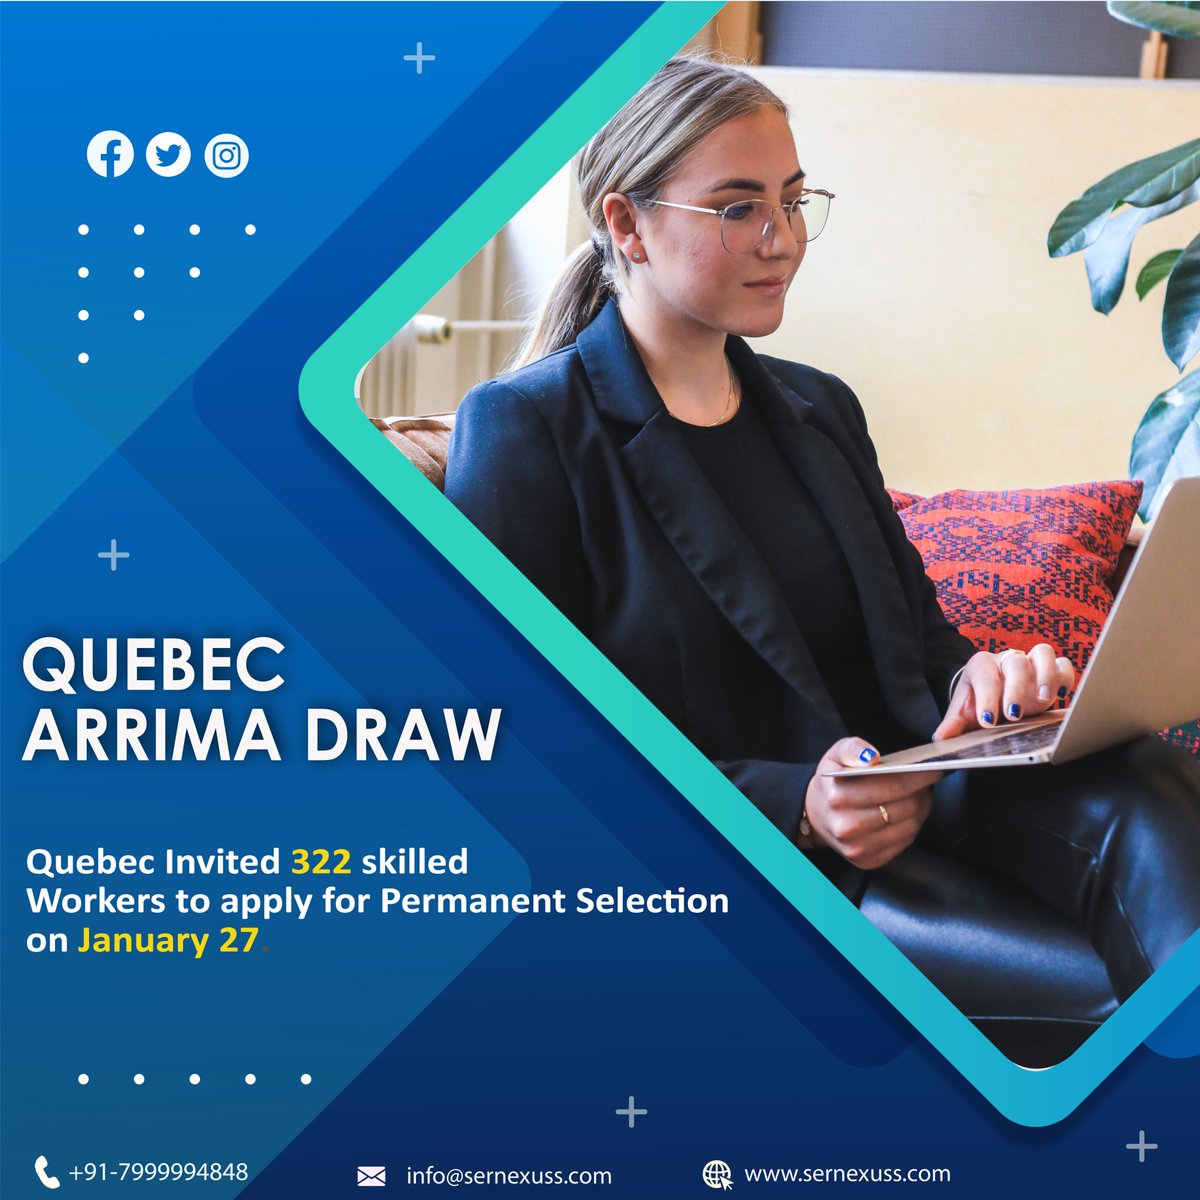 Quebec's immigration ministry released details of a second immigration draw held in January.

Learn more: bit.ly/3L5alX6

#Quebec #Quebecimmigration #Quebecarrimadraw #arrimadraw #canadaimmigration #canadapr #sernexuss